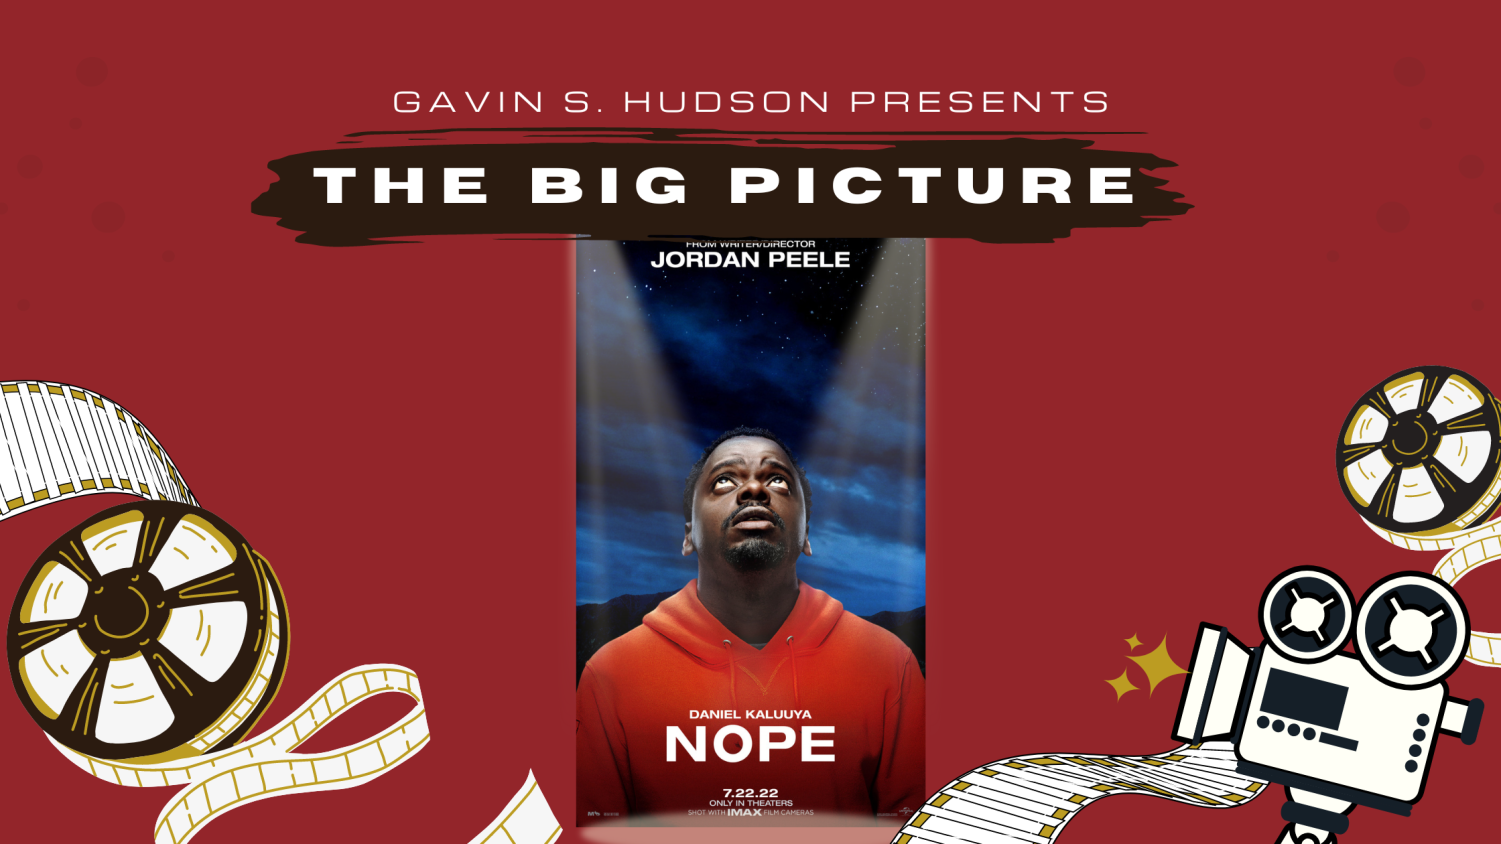 Graphic created in Canva by Dominique Williams and Gavin S. Hudson. Movie posters courtesy of Universal Pictures.